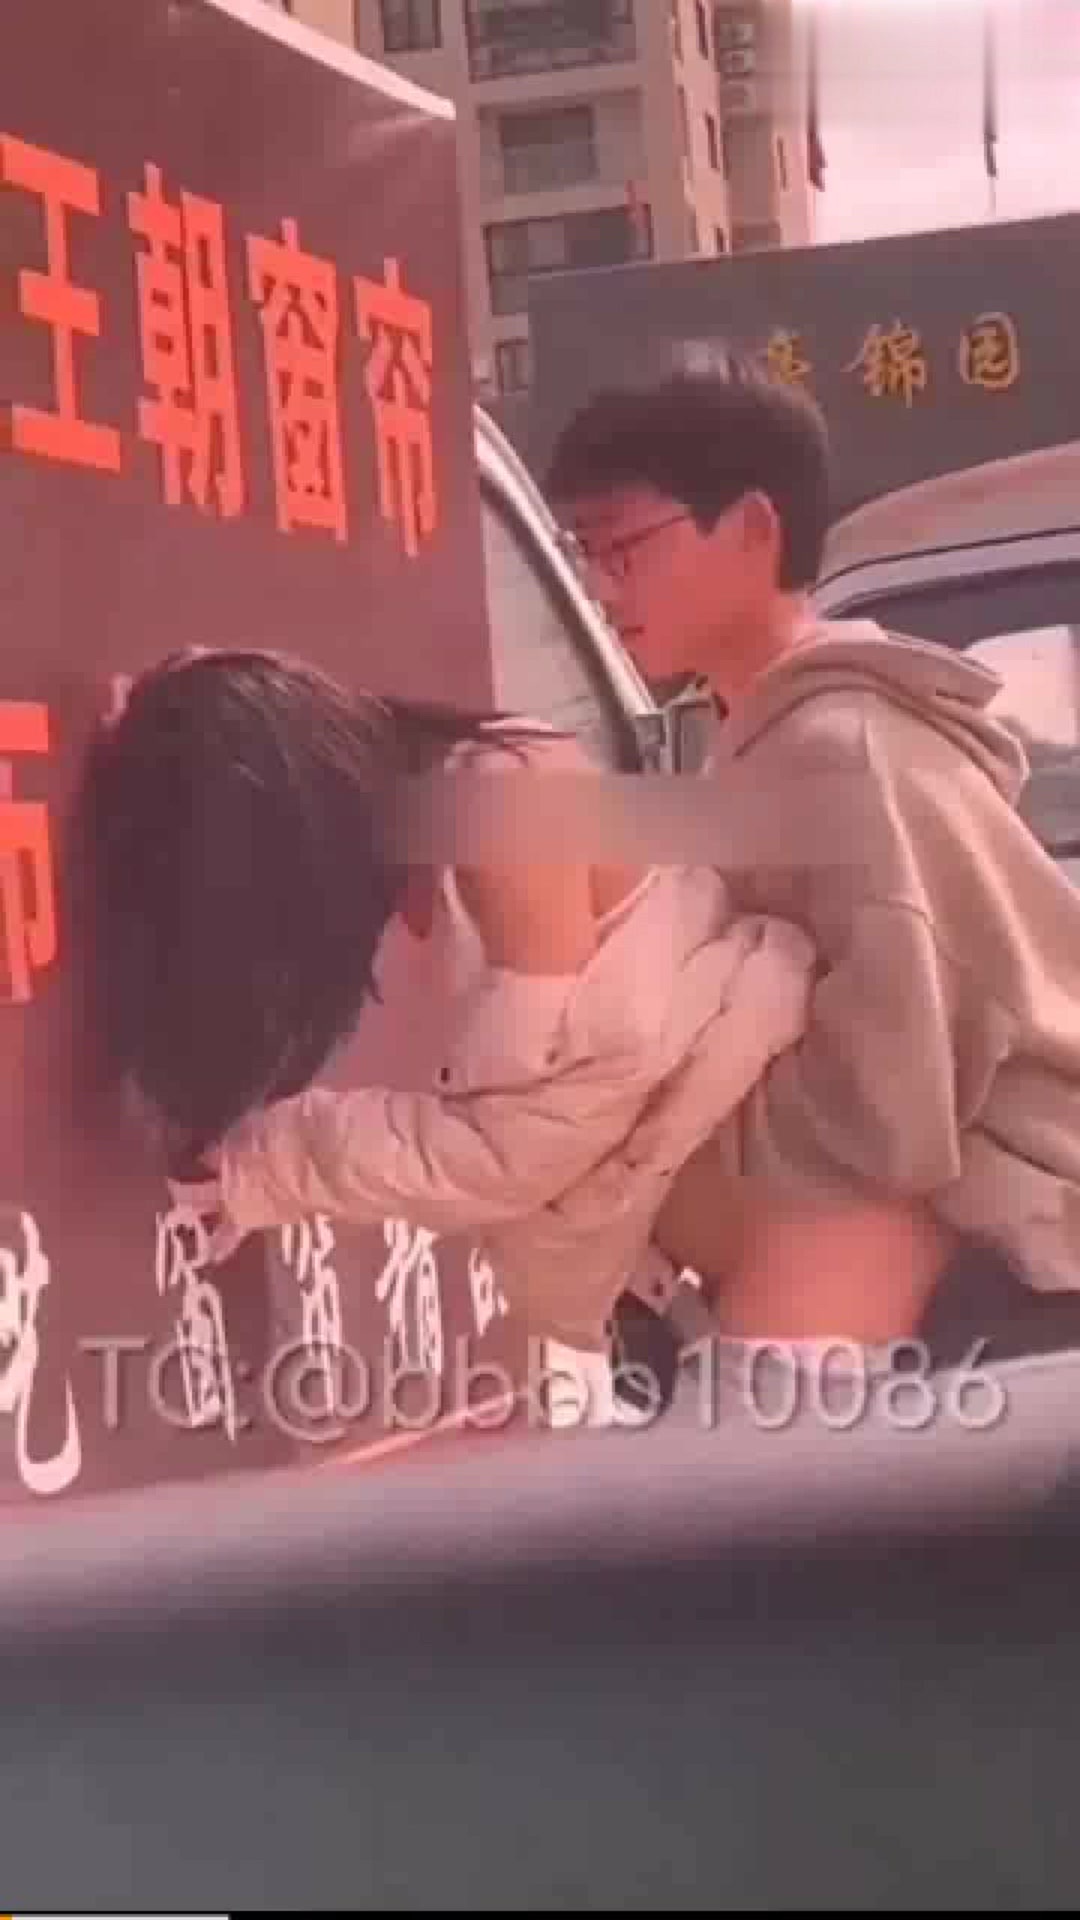 Wenzhou [Yonghao Jinyuan] Yongxing Middle School students in front of the neighborhood snogging incident + students wildlife was secretly photographed